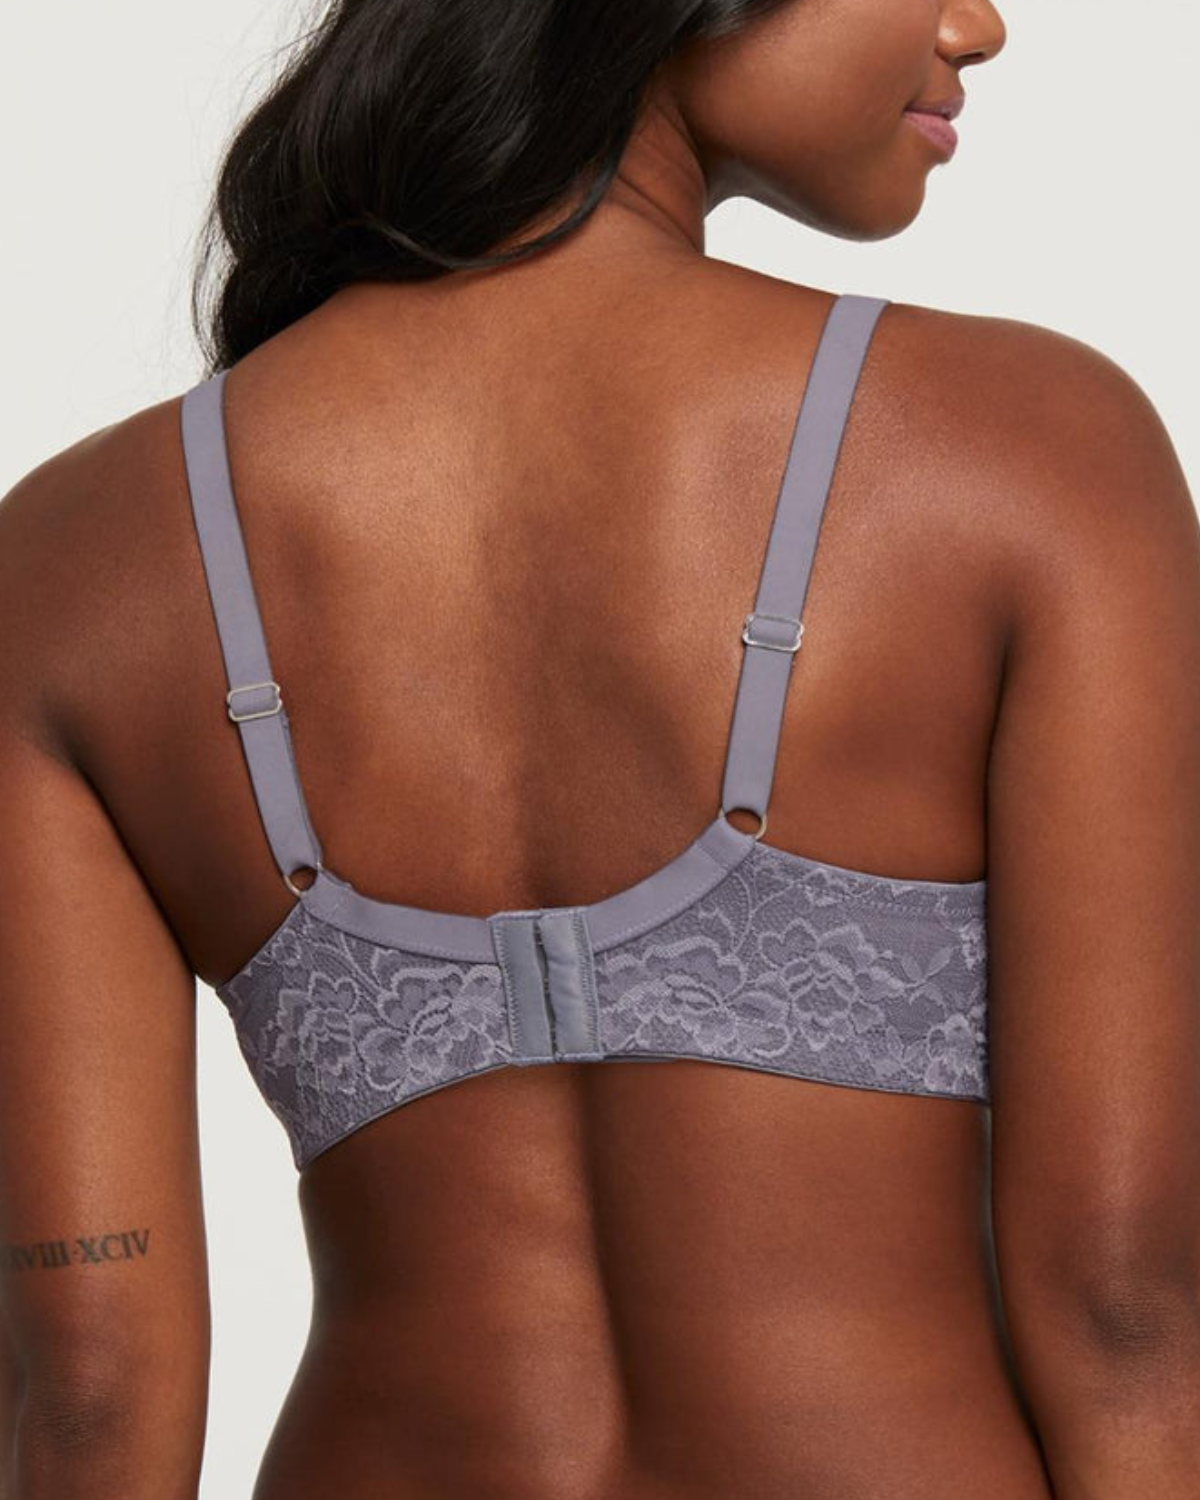 Montelle Wire-Free Dream Bra (More colors available) - 9326 - Grey